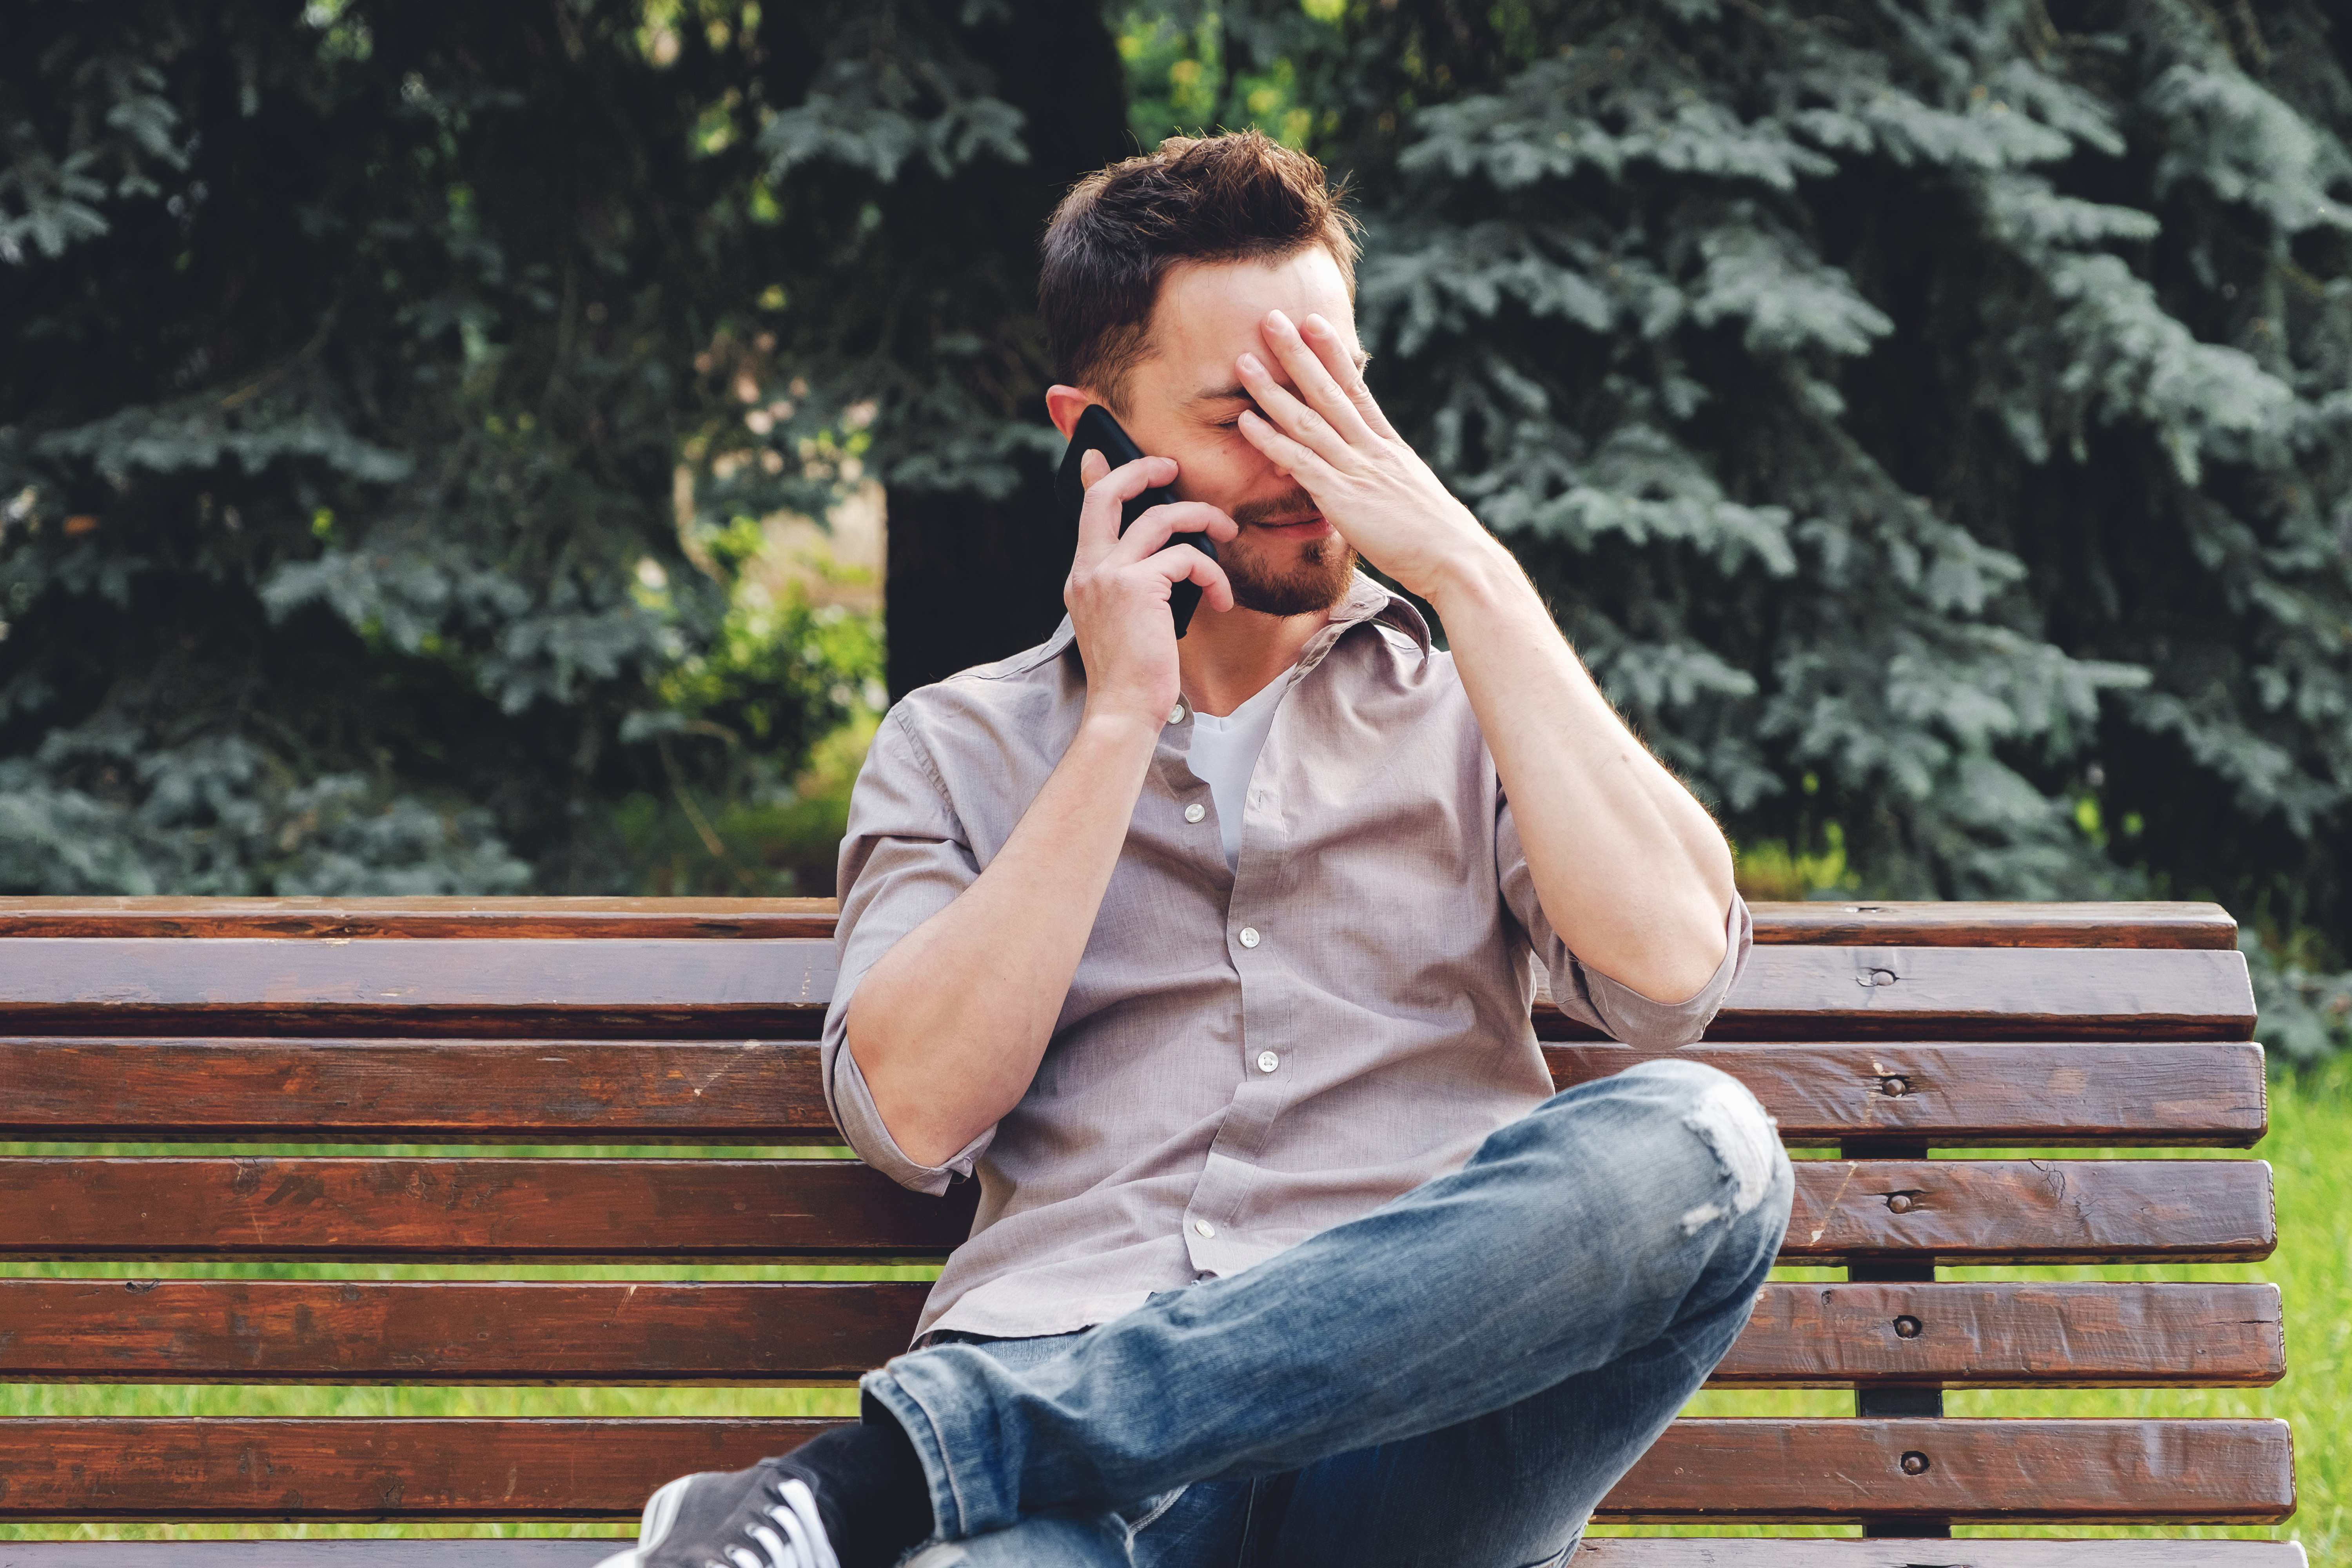 A man looking stressed while on the phone | Source: Freepik